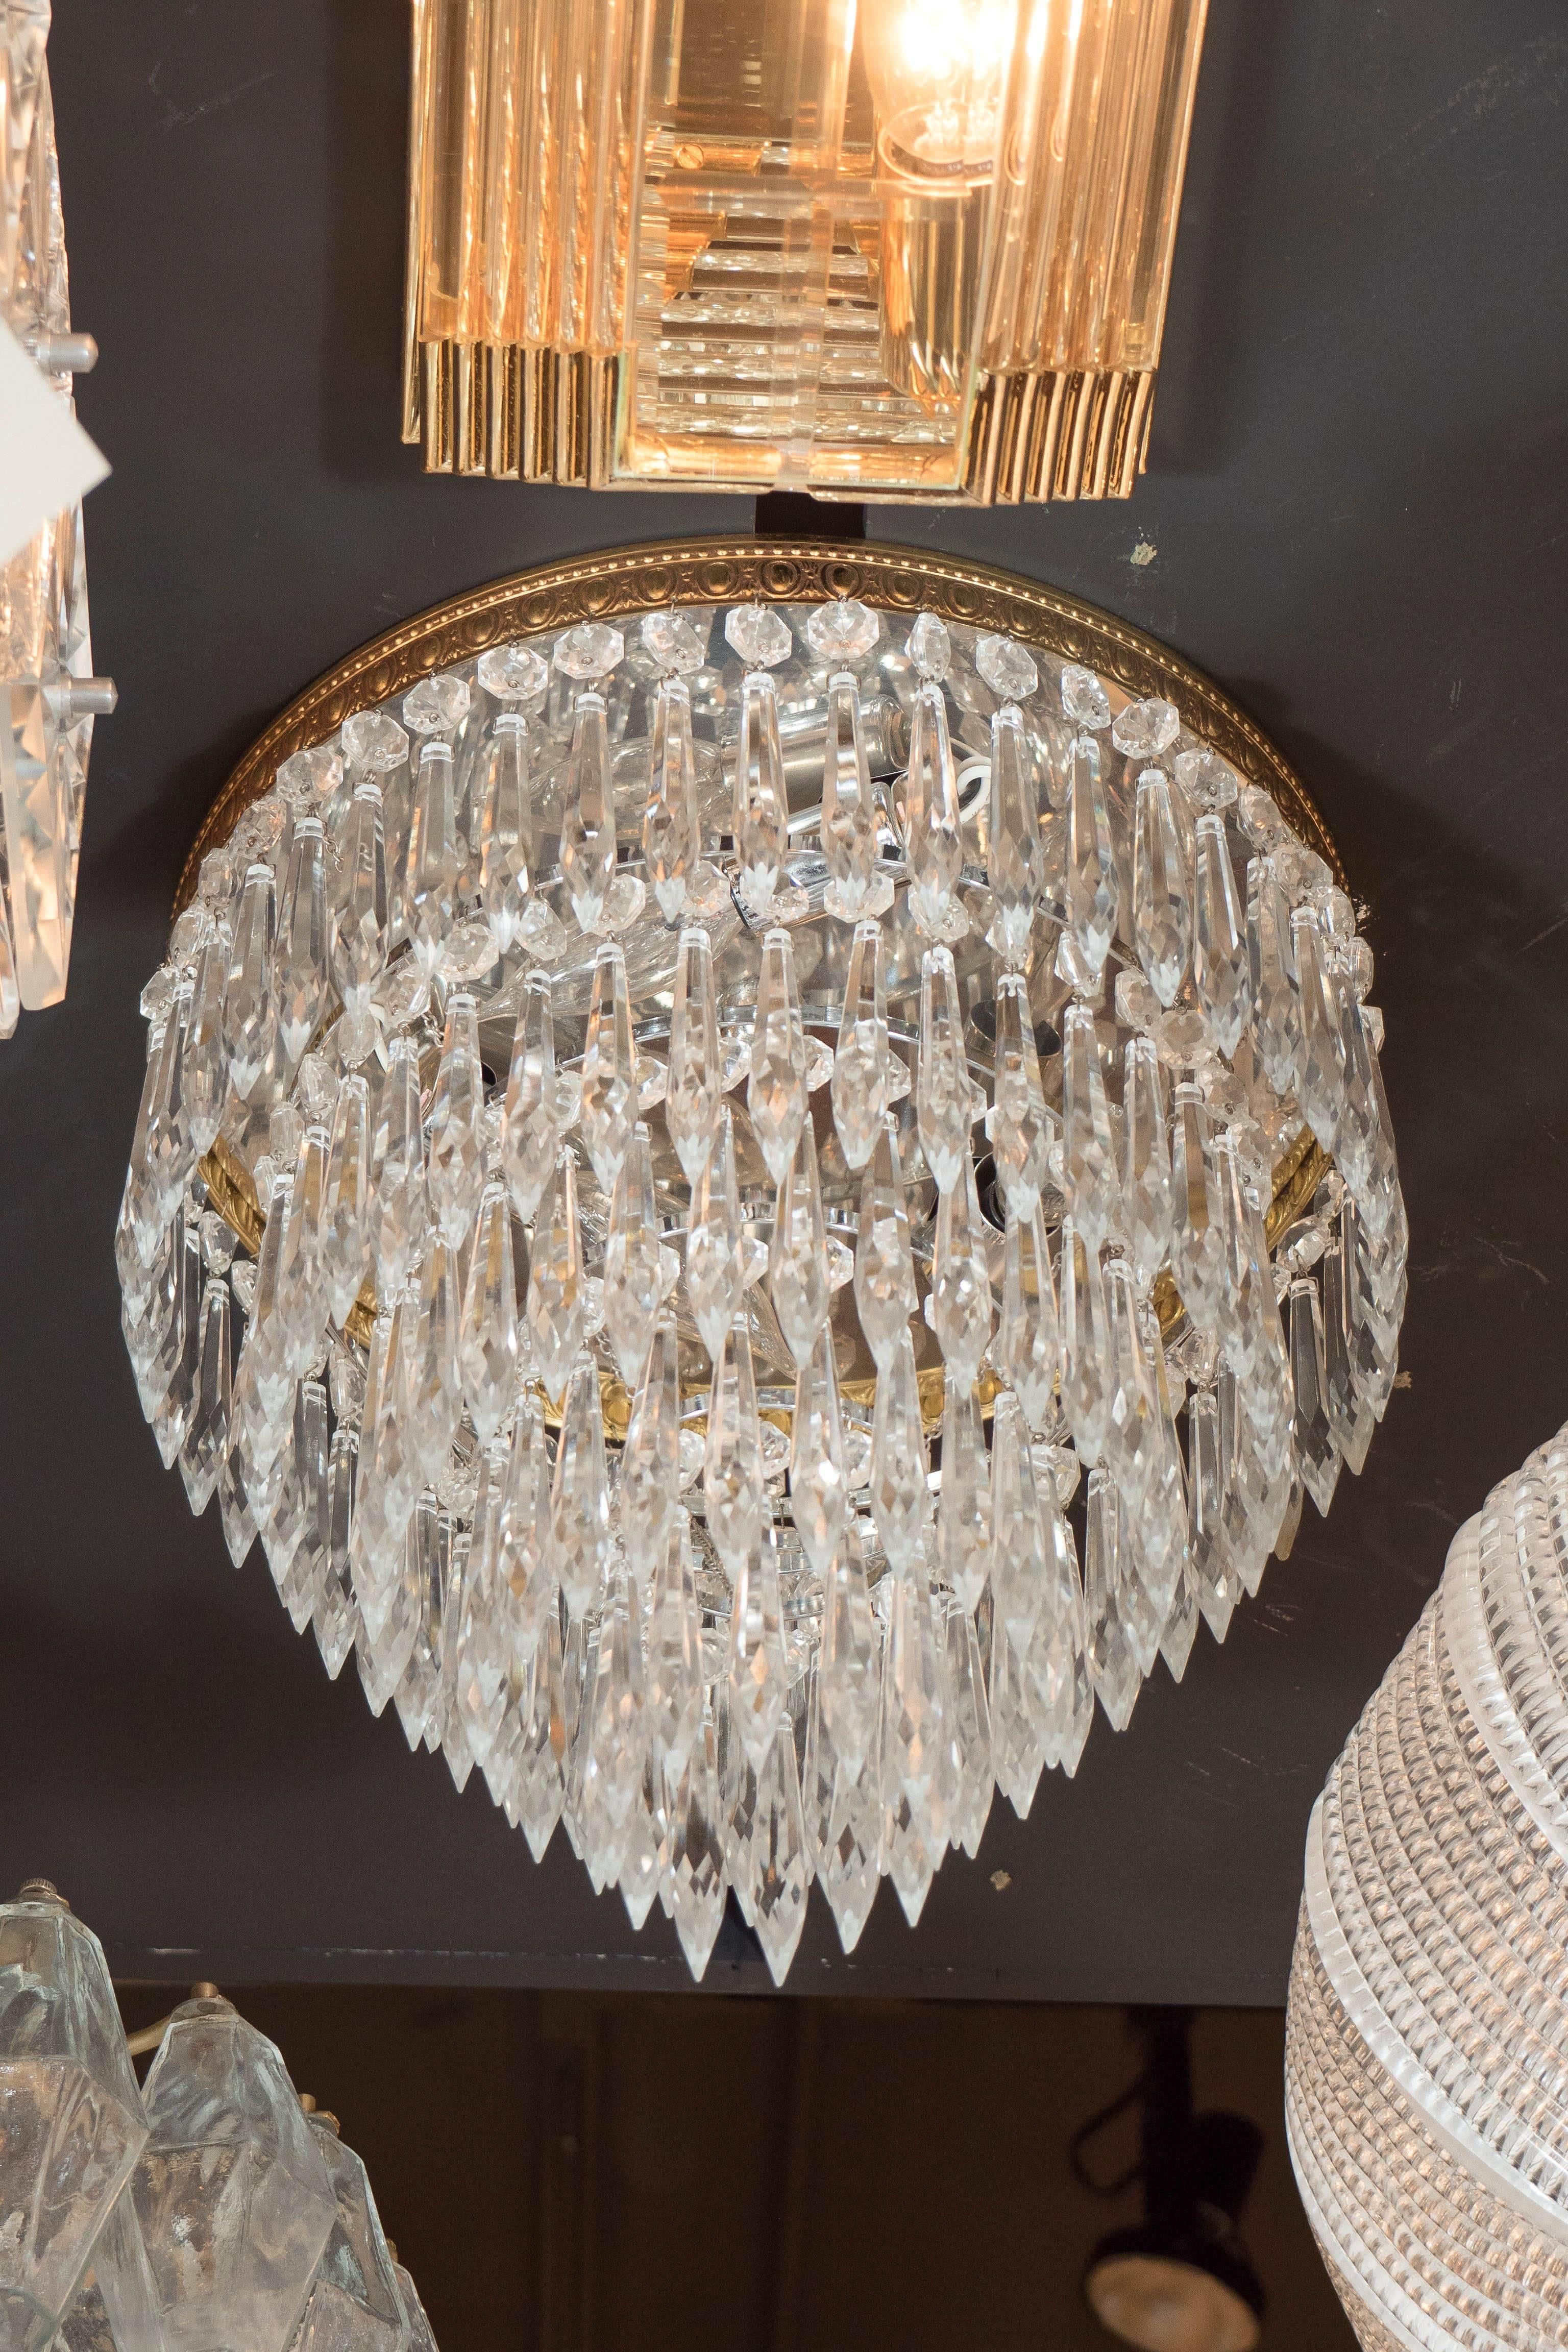 This elegant 1940's cut crystal flush mount chandelier features 5 tiers of hand-cut crystals in faceted pendant forms. The brass detailing features a beautiful pattern which contours the upper tier. A classic example of Hollywood Regency style and